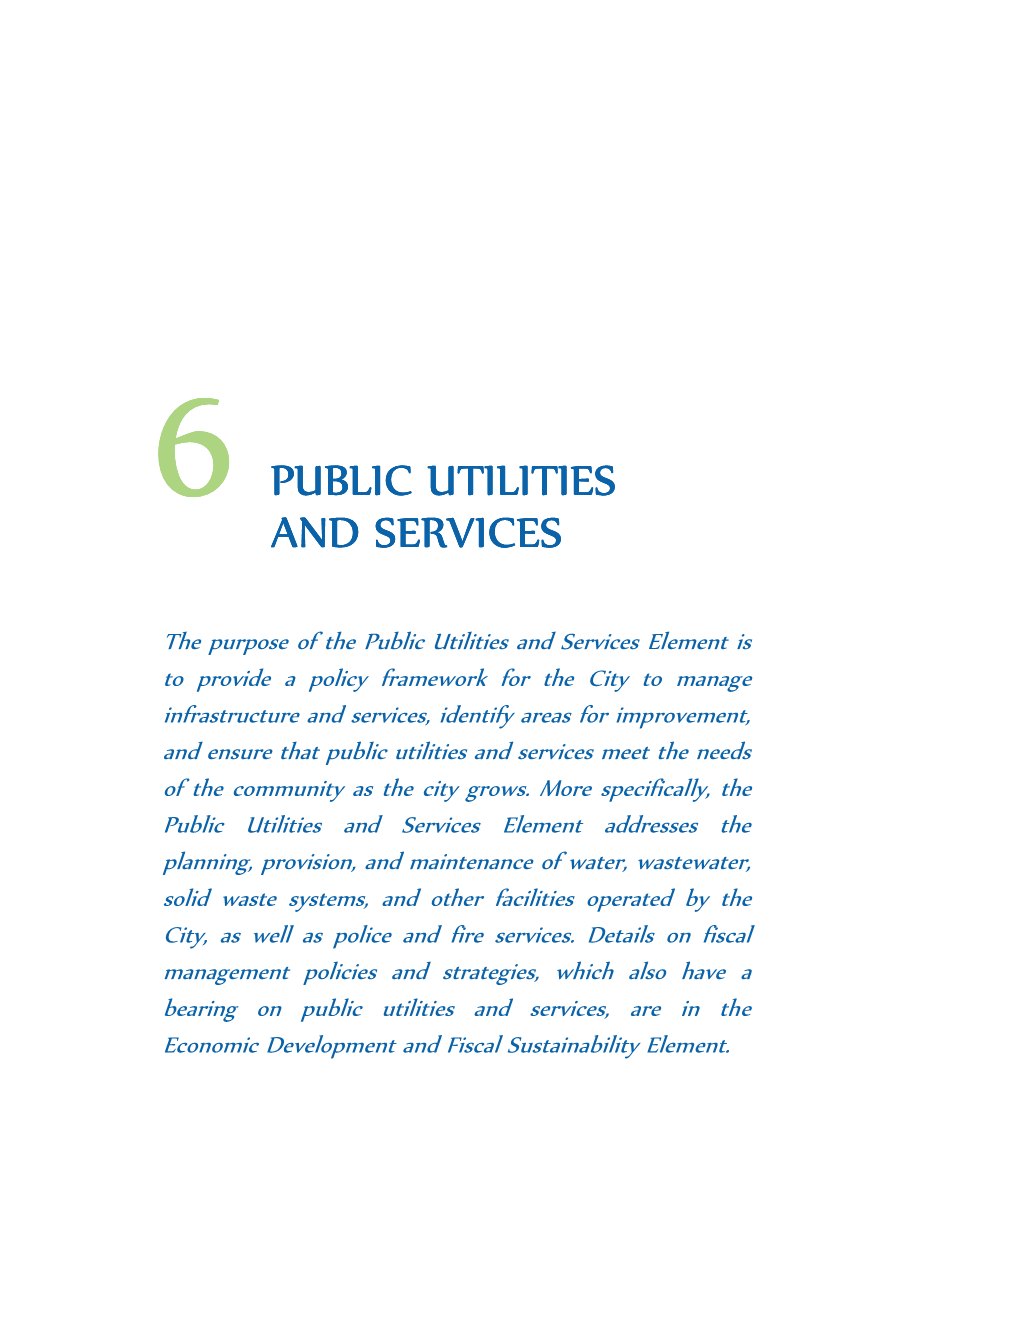 6 Public Utilities and Services and Services